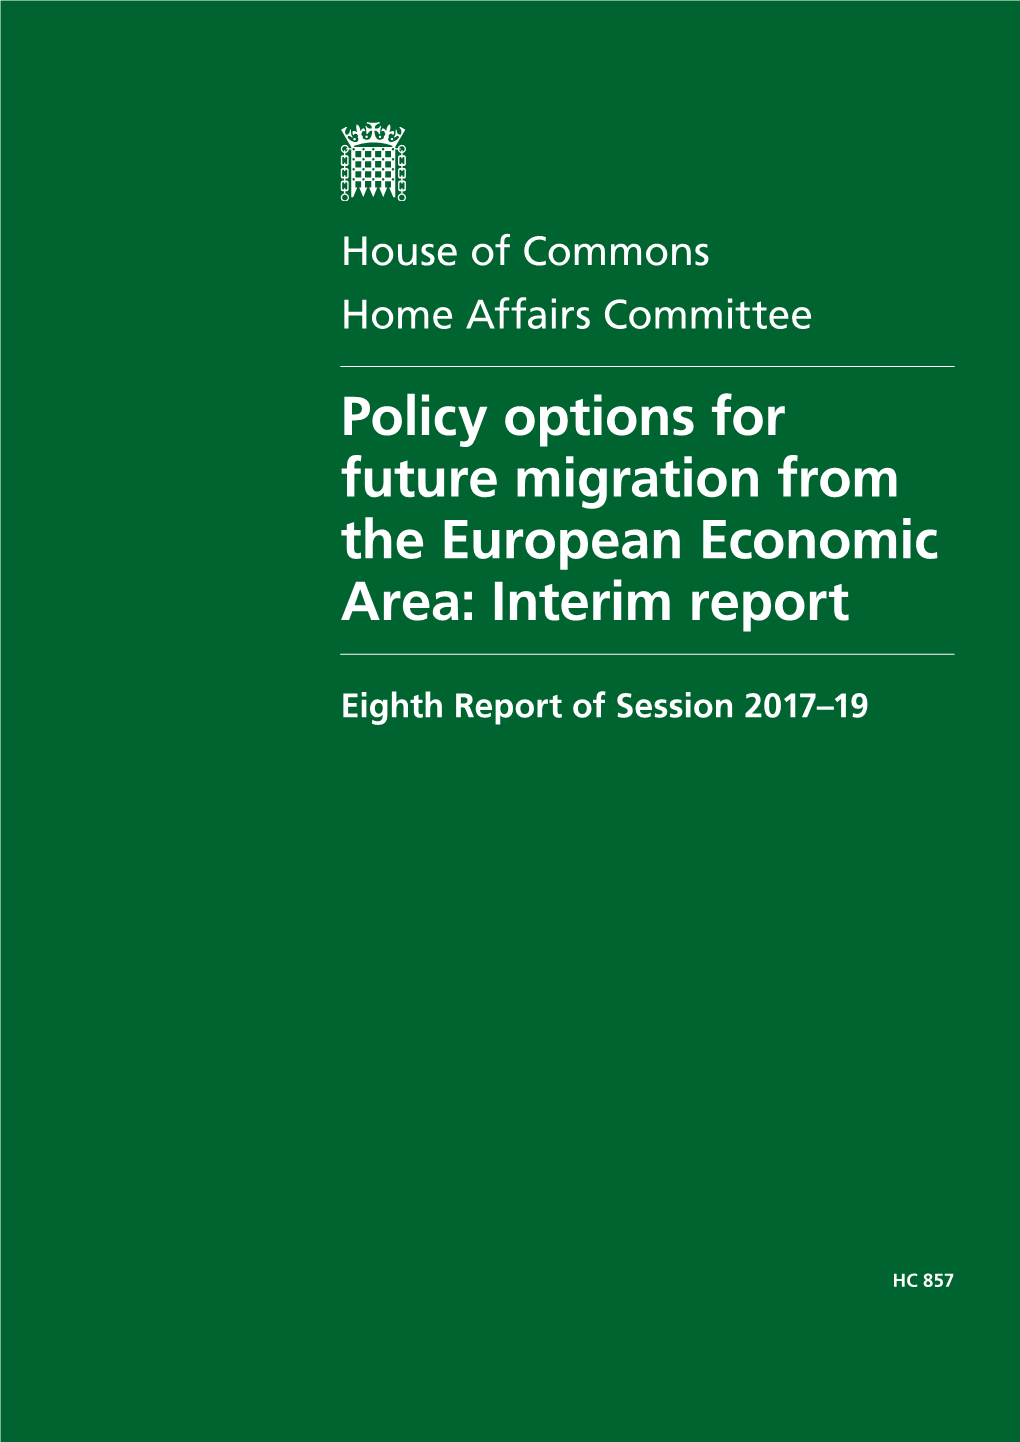 Policy Options for Future Migration from the European Economic Area: Interim Report